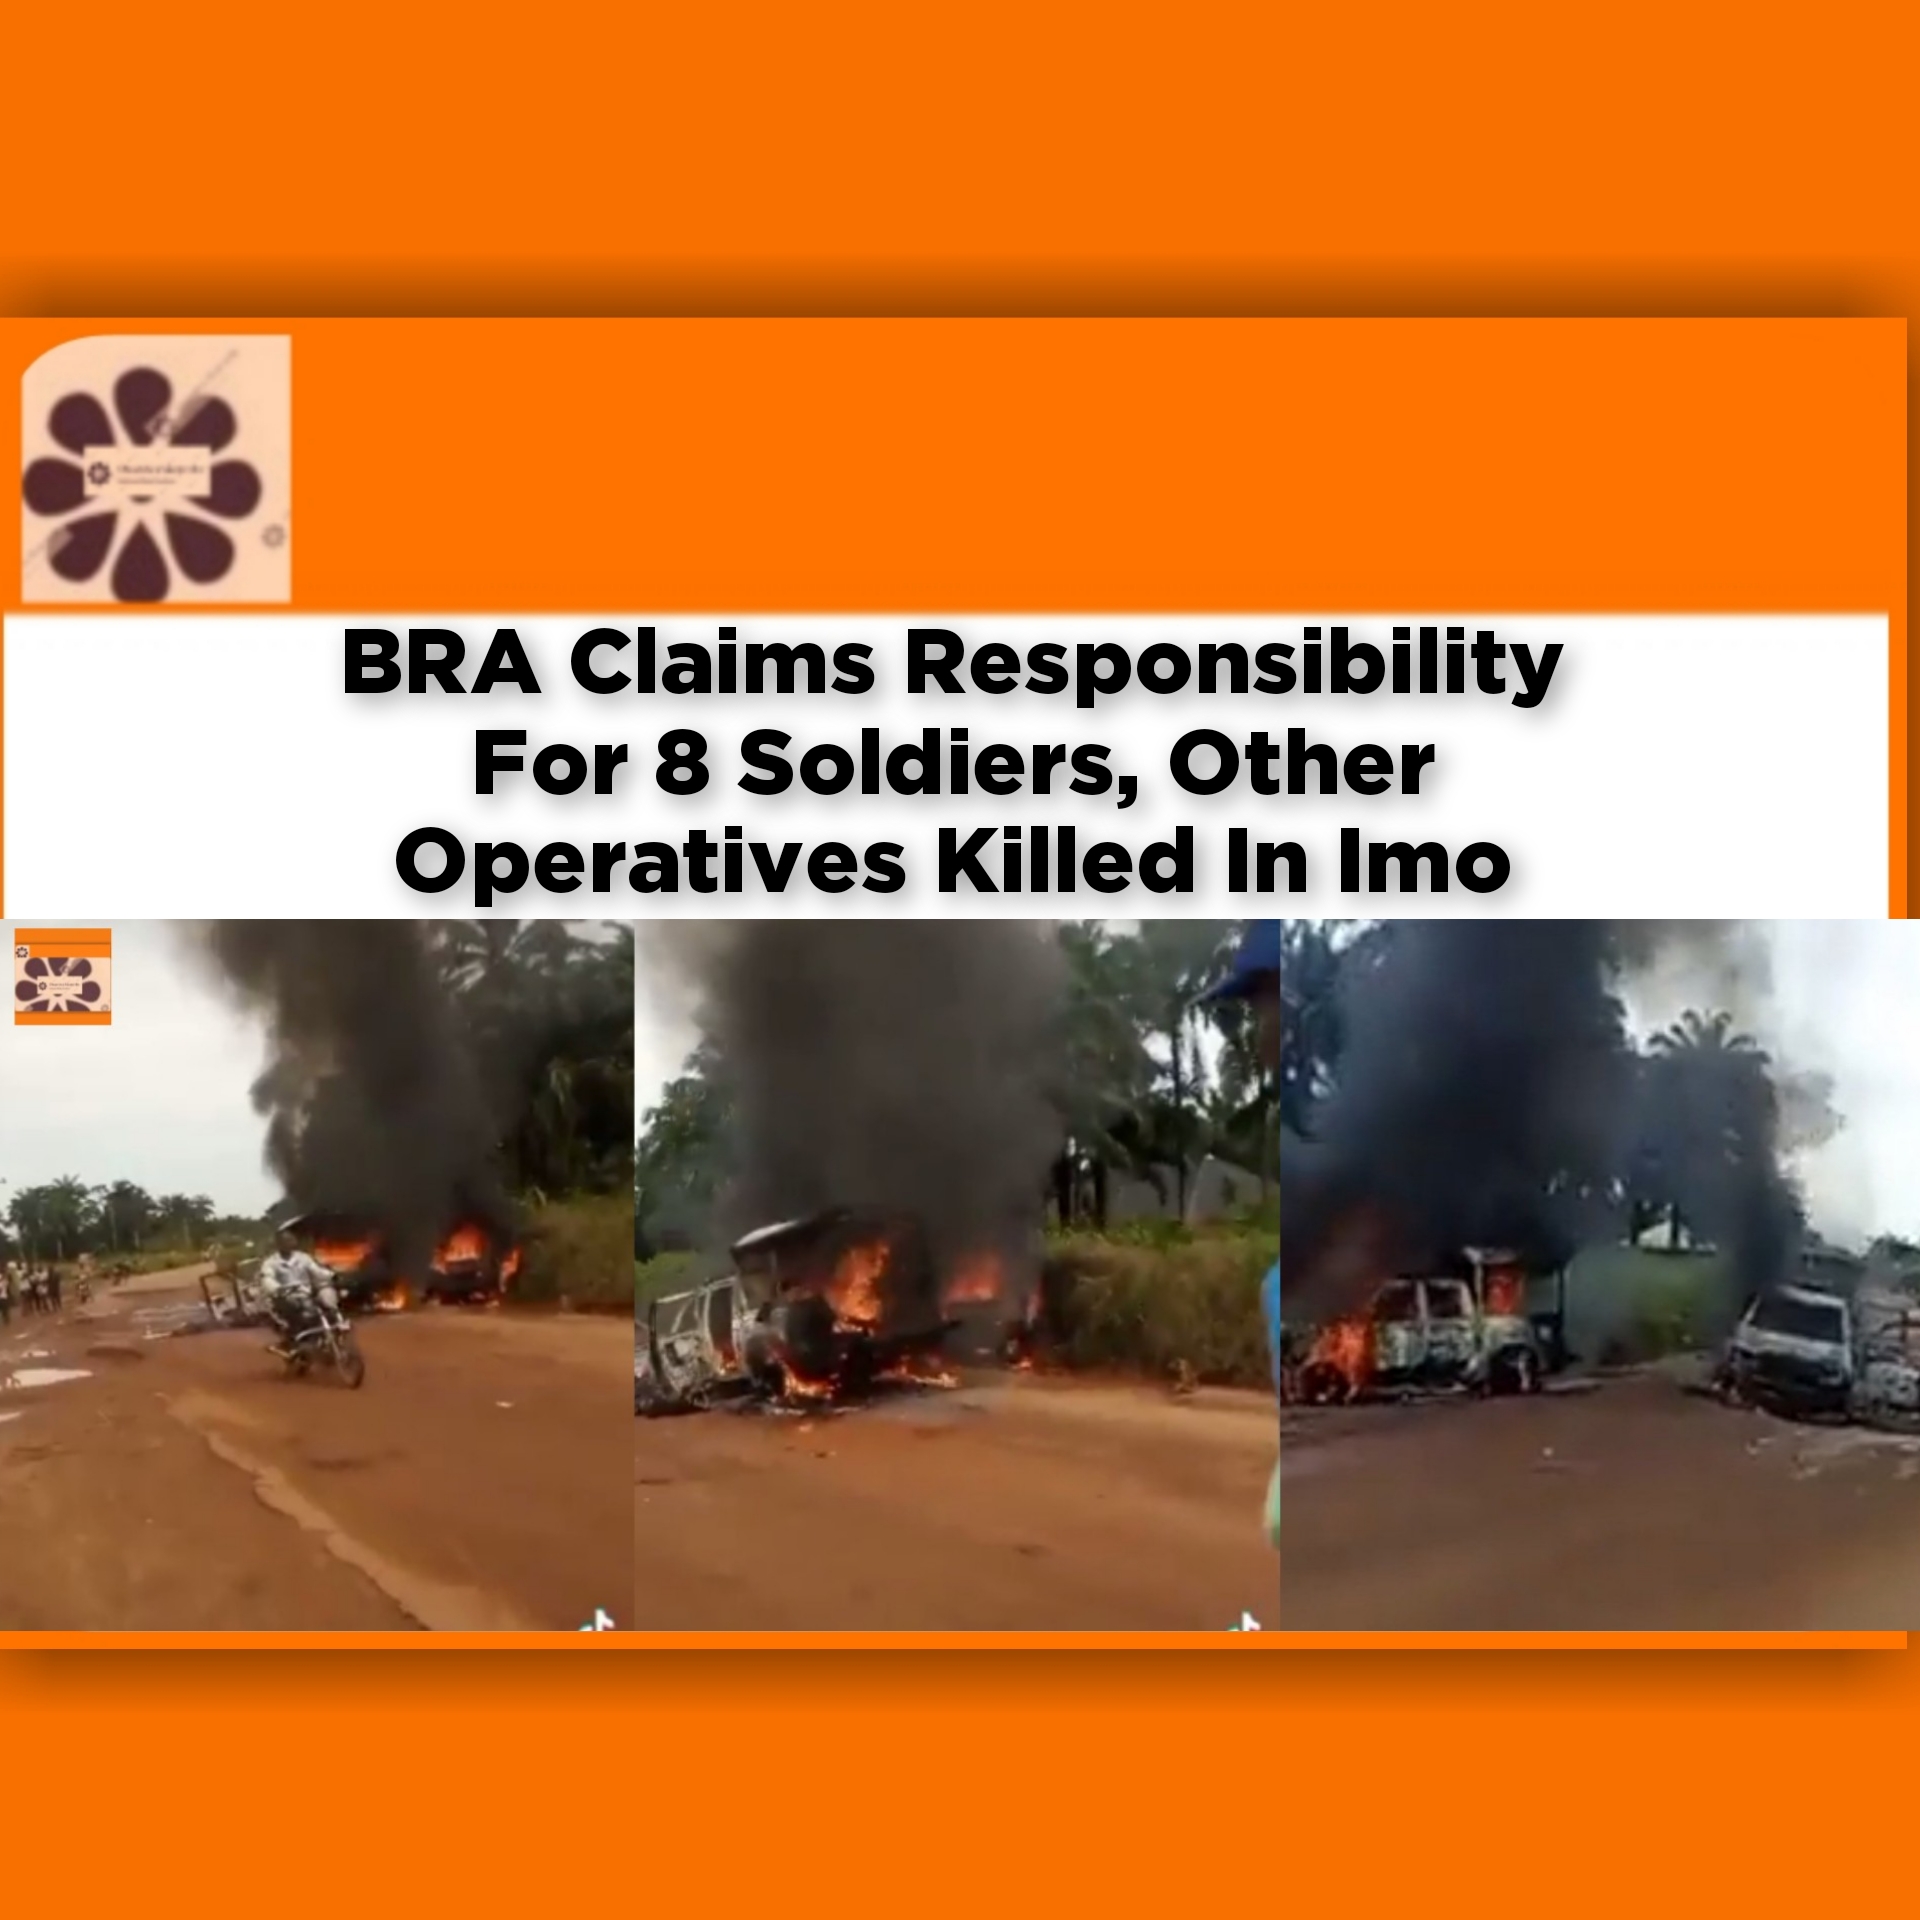 BRA Claims Responsibility For 8 Soldiers, Other Operatives Killed In Imo ~ OsazuwaAkonedo Columns